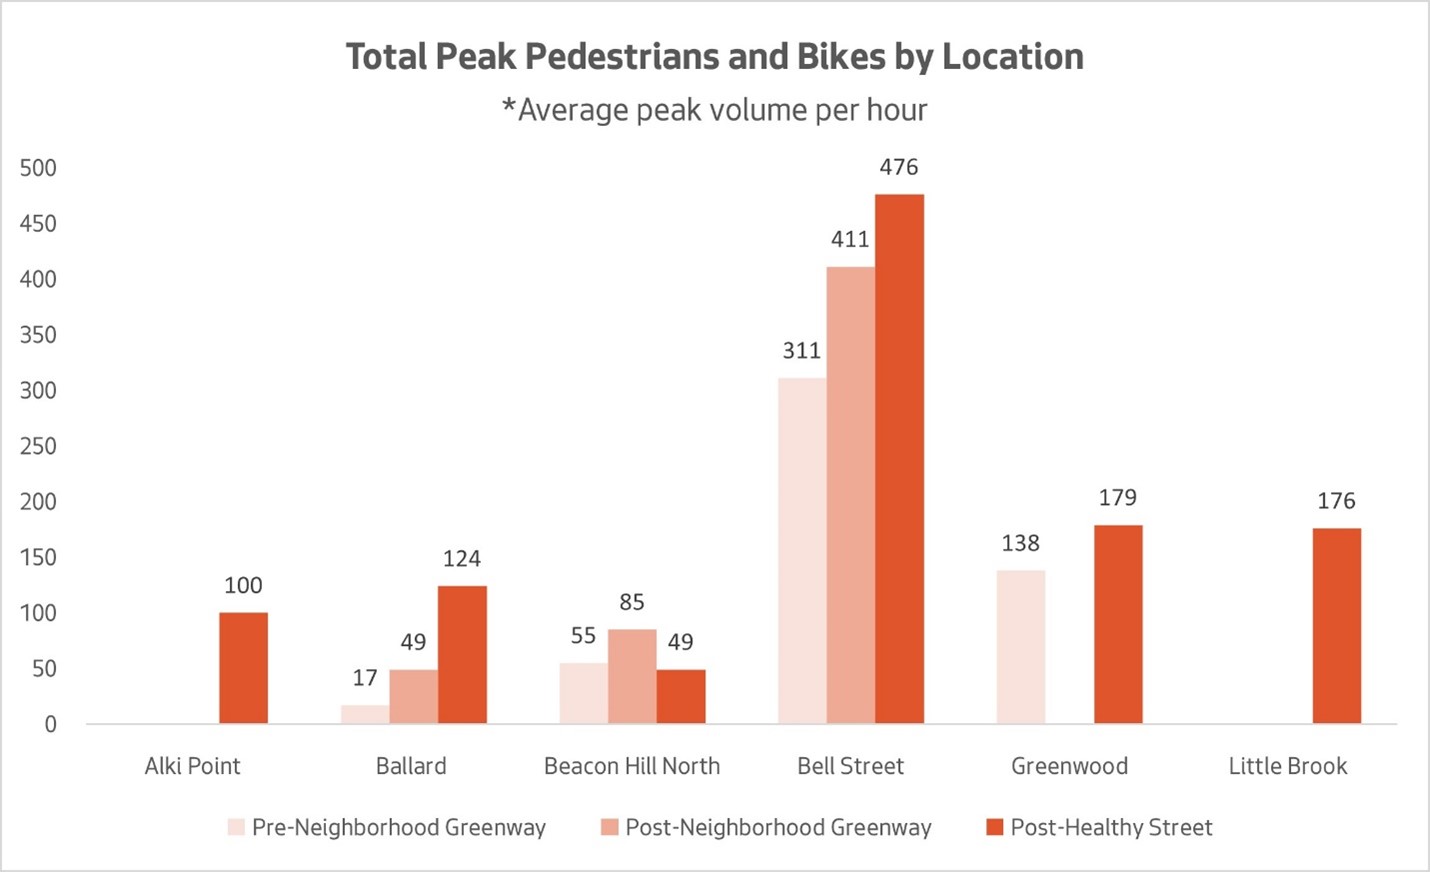 Bar chart showing average peak volume per hour of pedestrian and bikes at different Healthy Street locations, comparing pre- and post-Healthy Street volumes. While data is incomplete for some locations, the general trend shows an increase across several locations. 